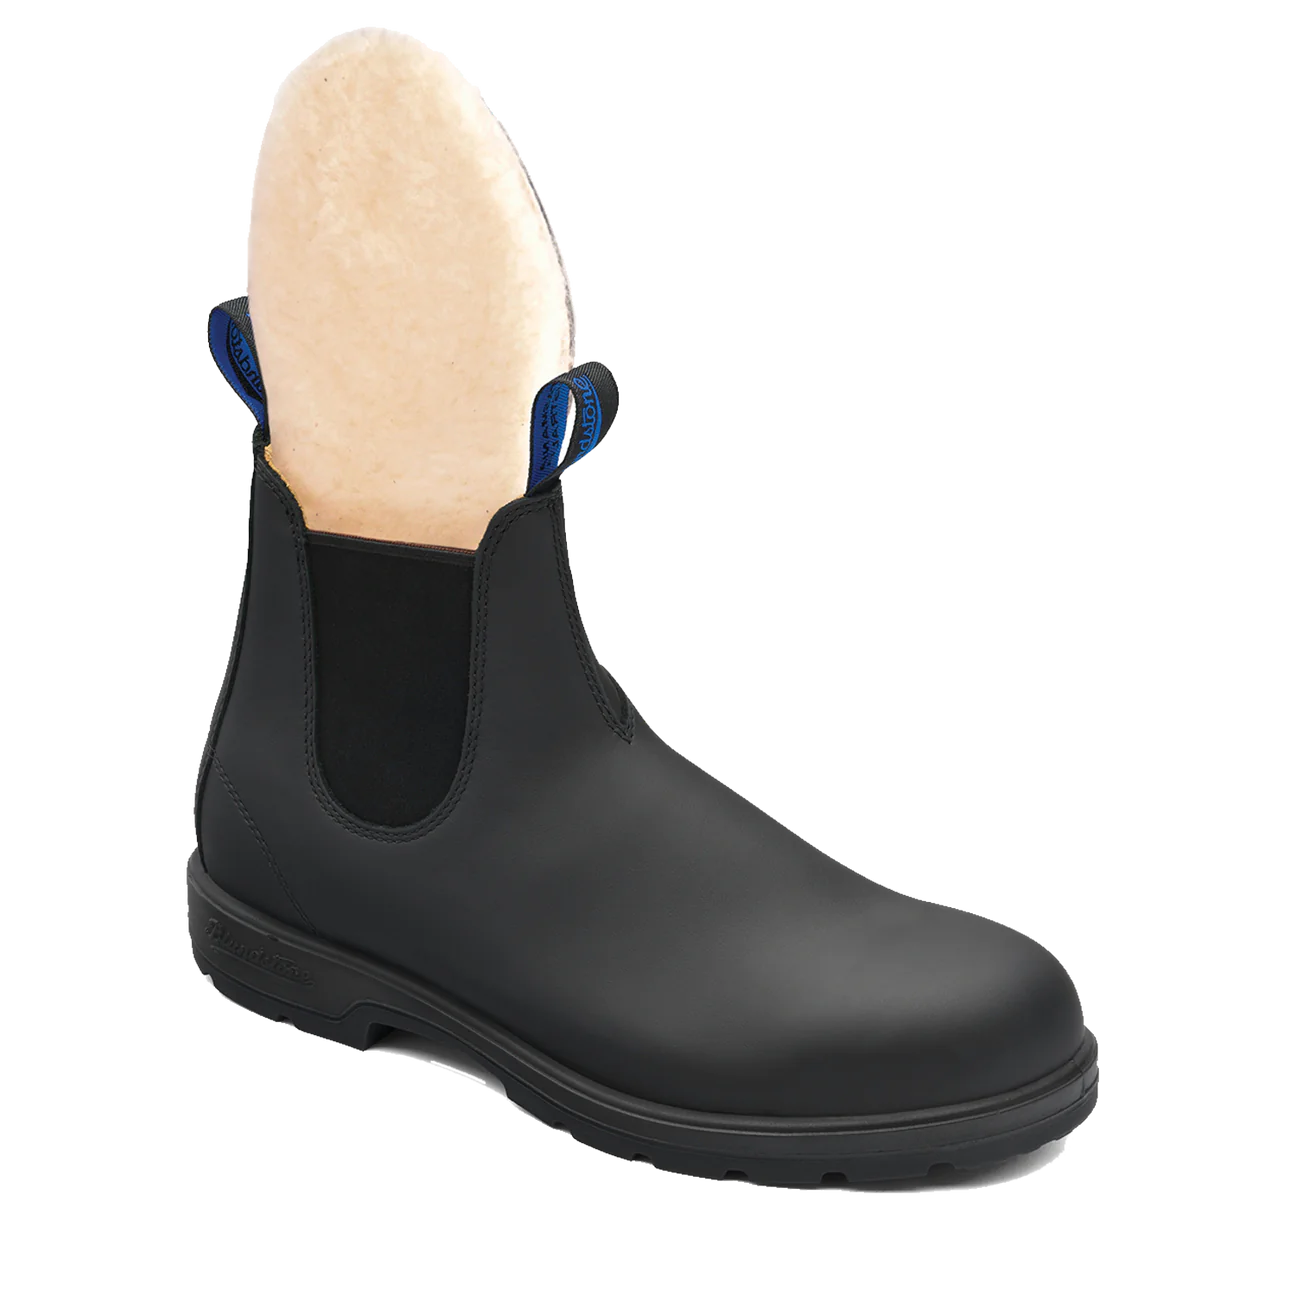 Blundstone Winter Thermal Classic Black Boot, 566